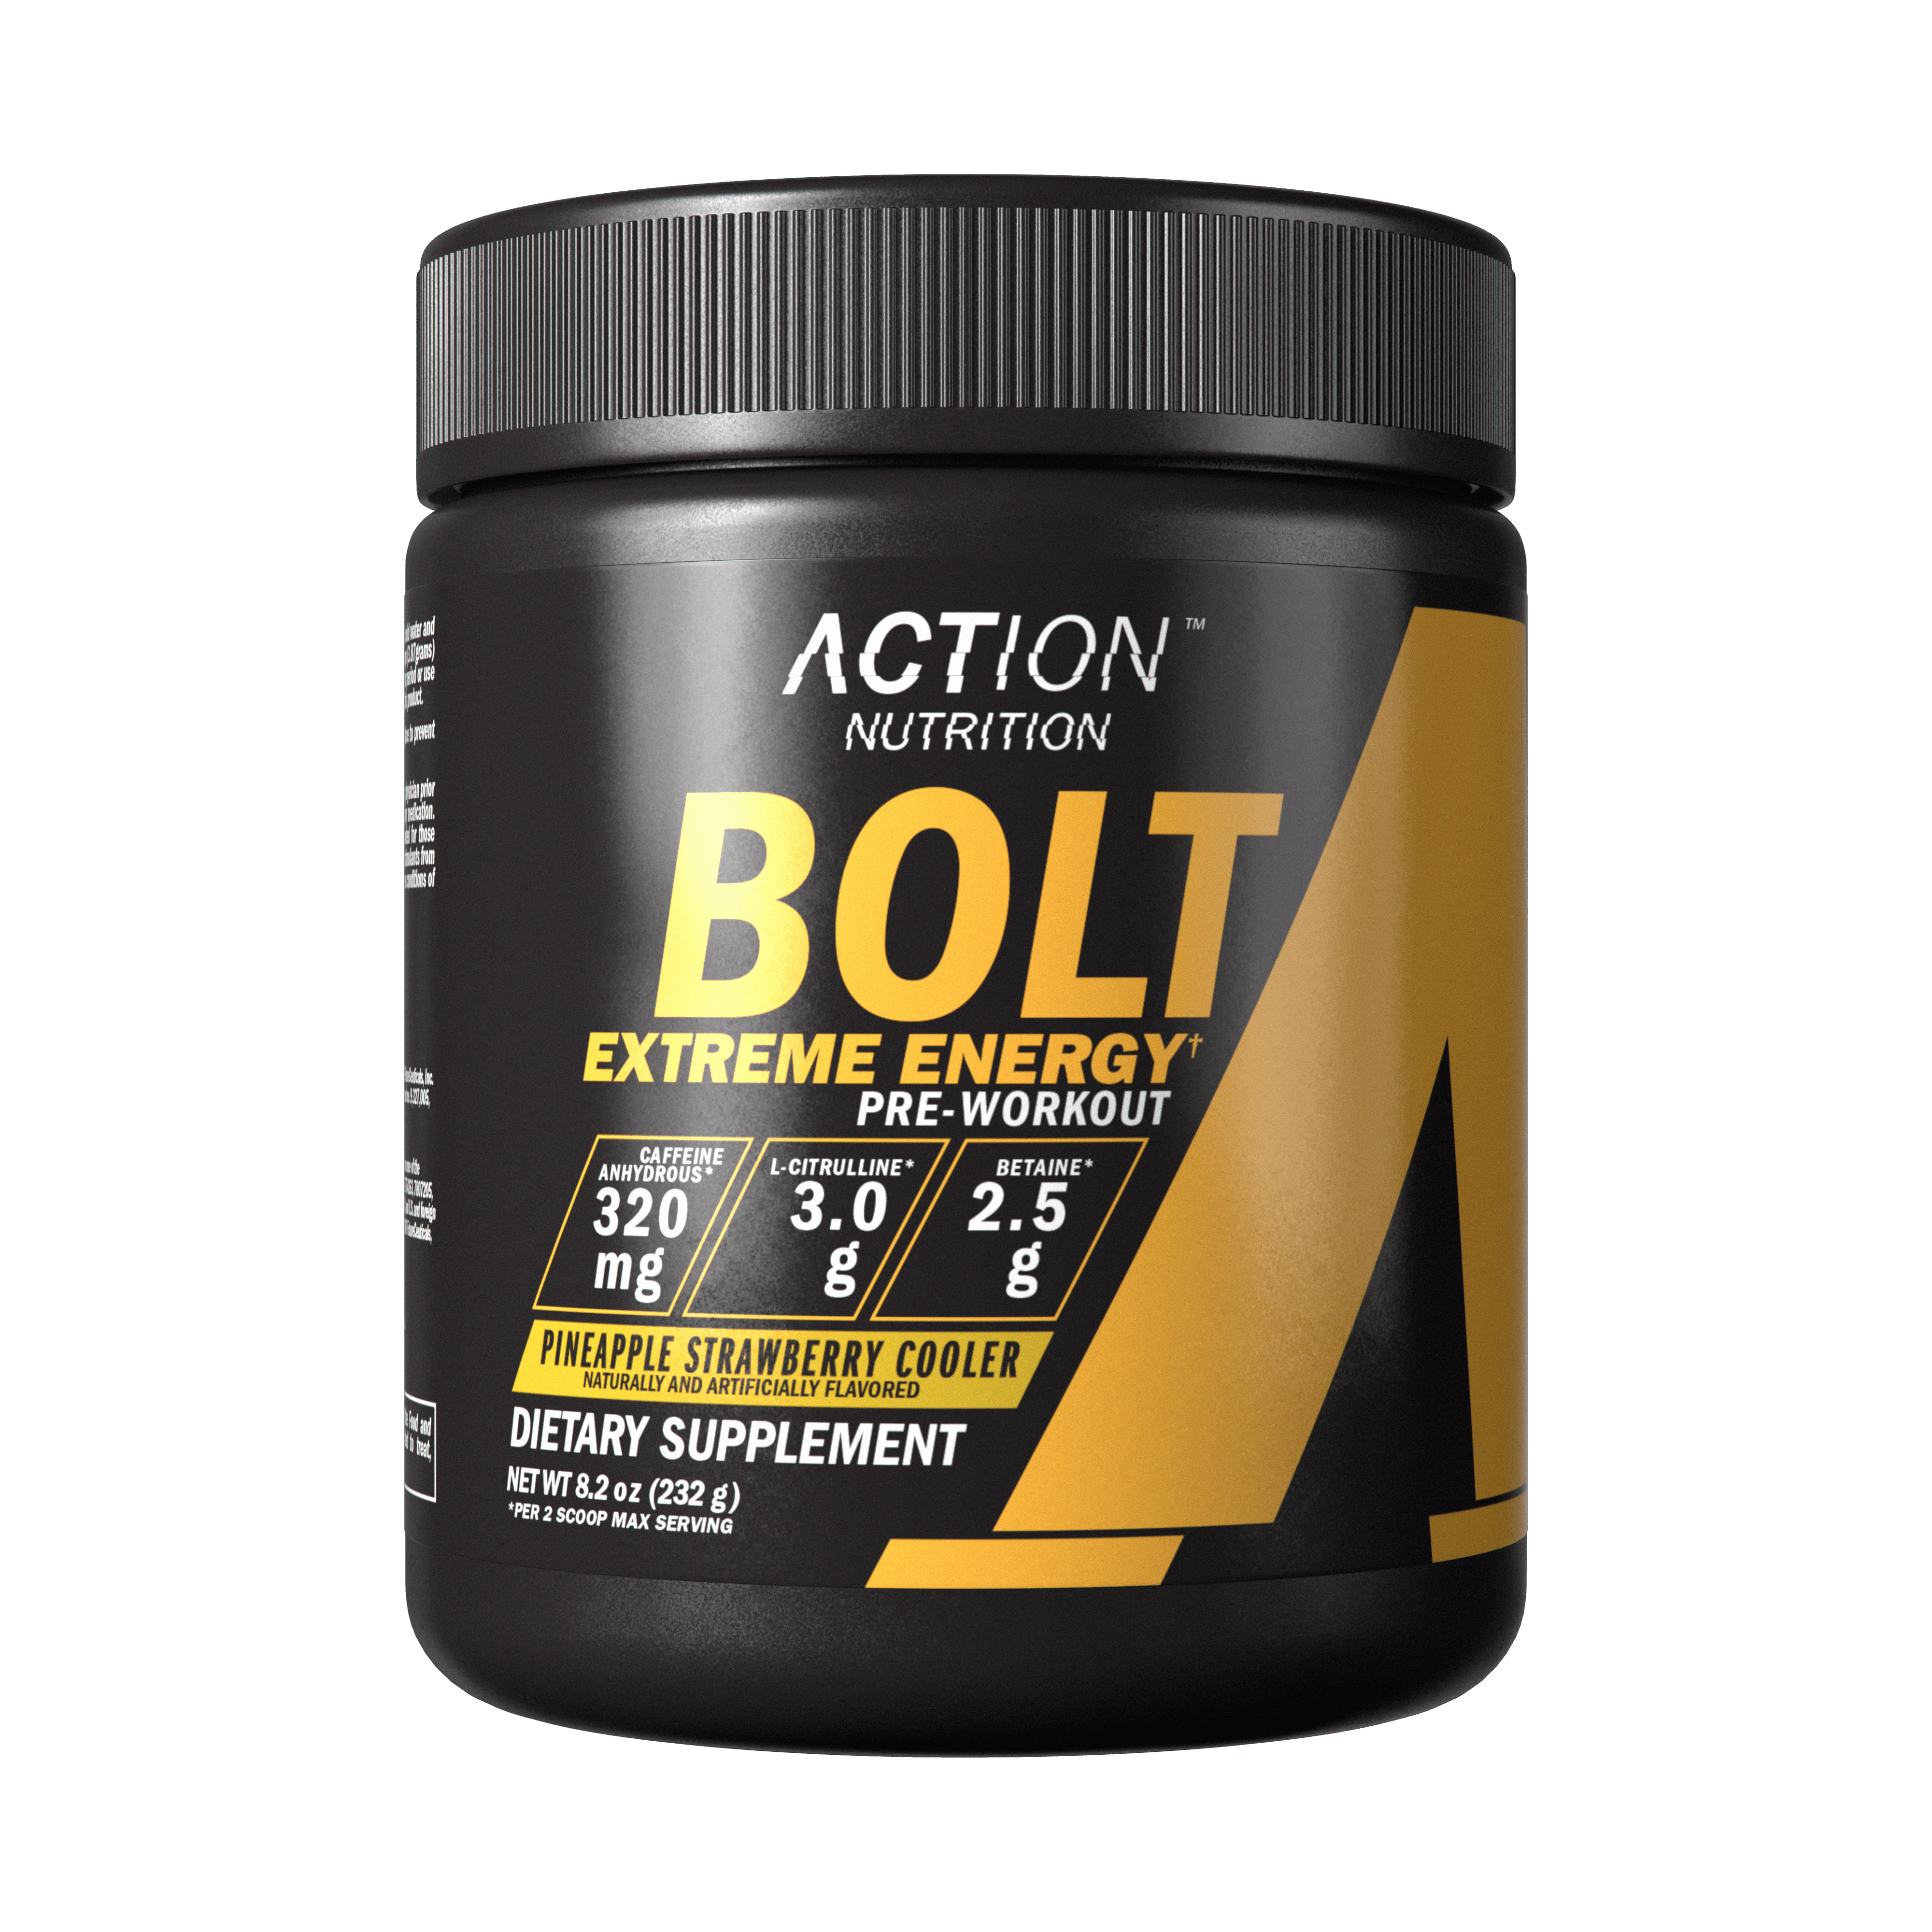 BOLT Extreme Energy Pre-Workout